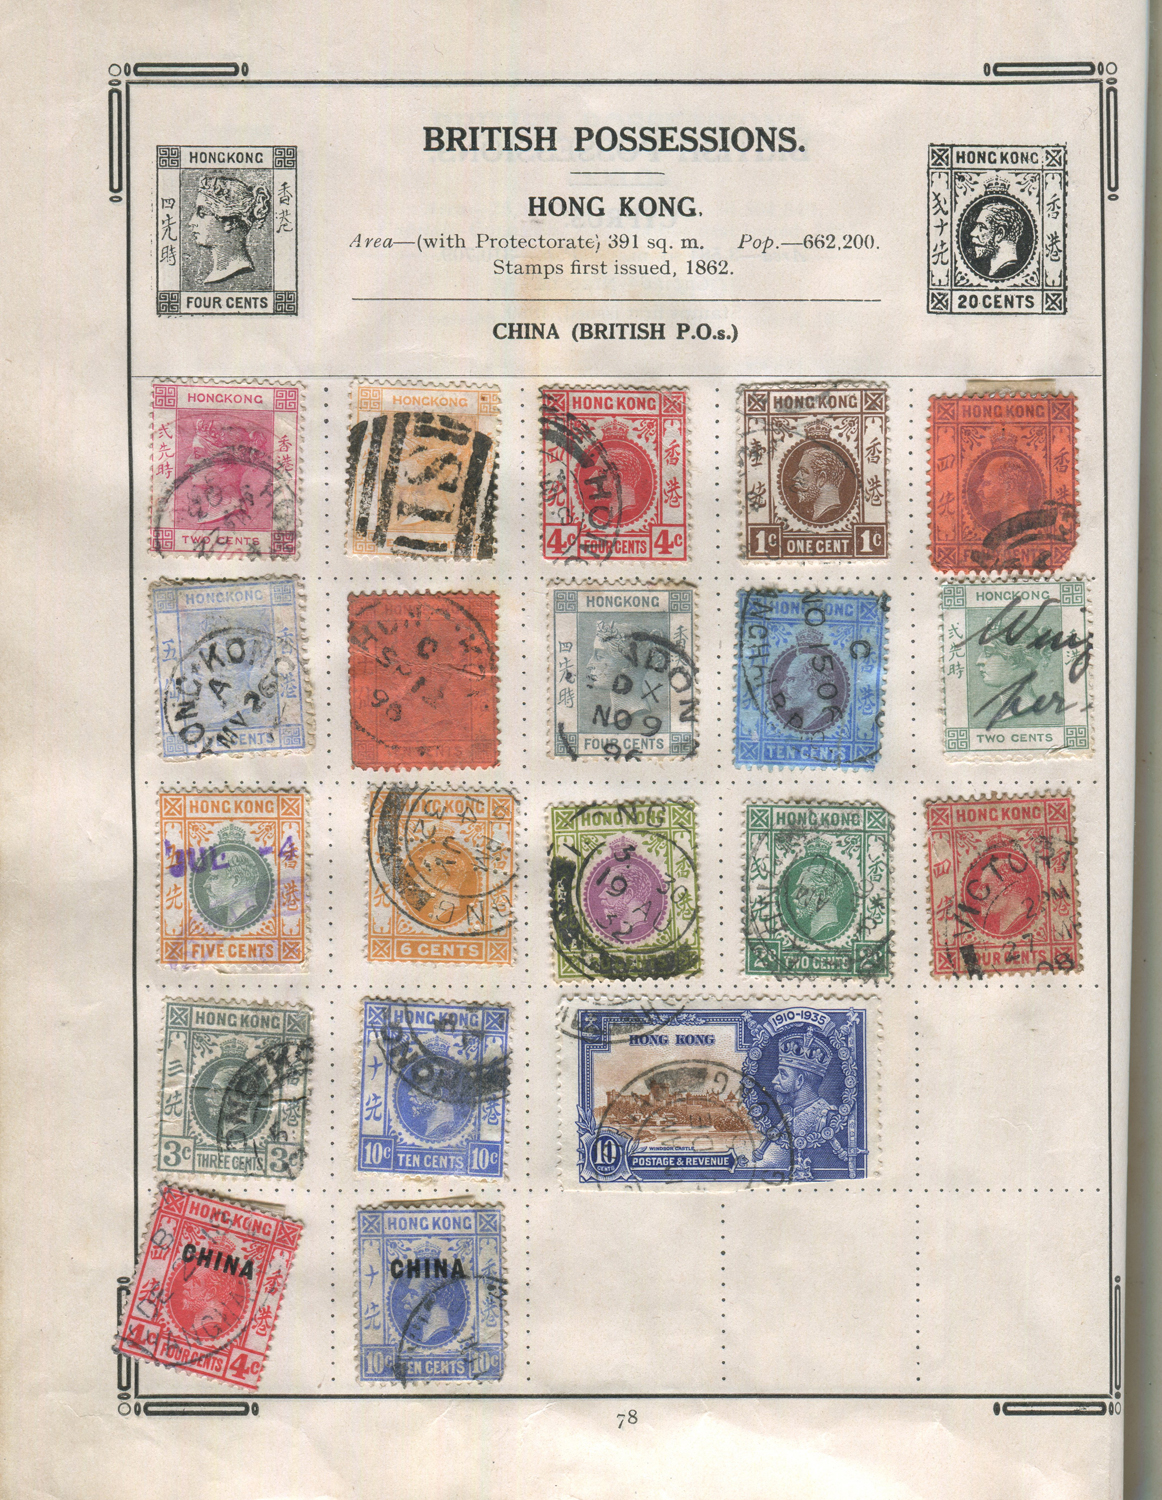 An Improved stamp album of world stamps.Buyer’s Premium 29.4% (including VAT @ 20%) of the hammer